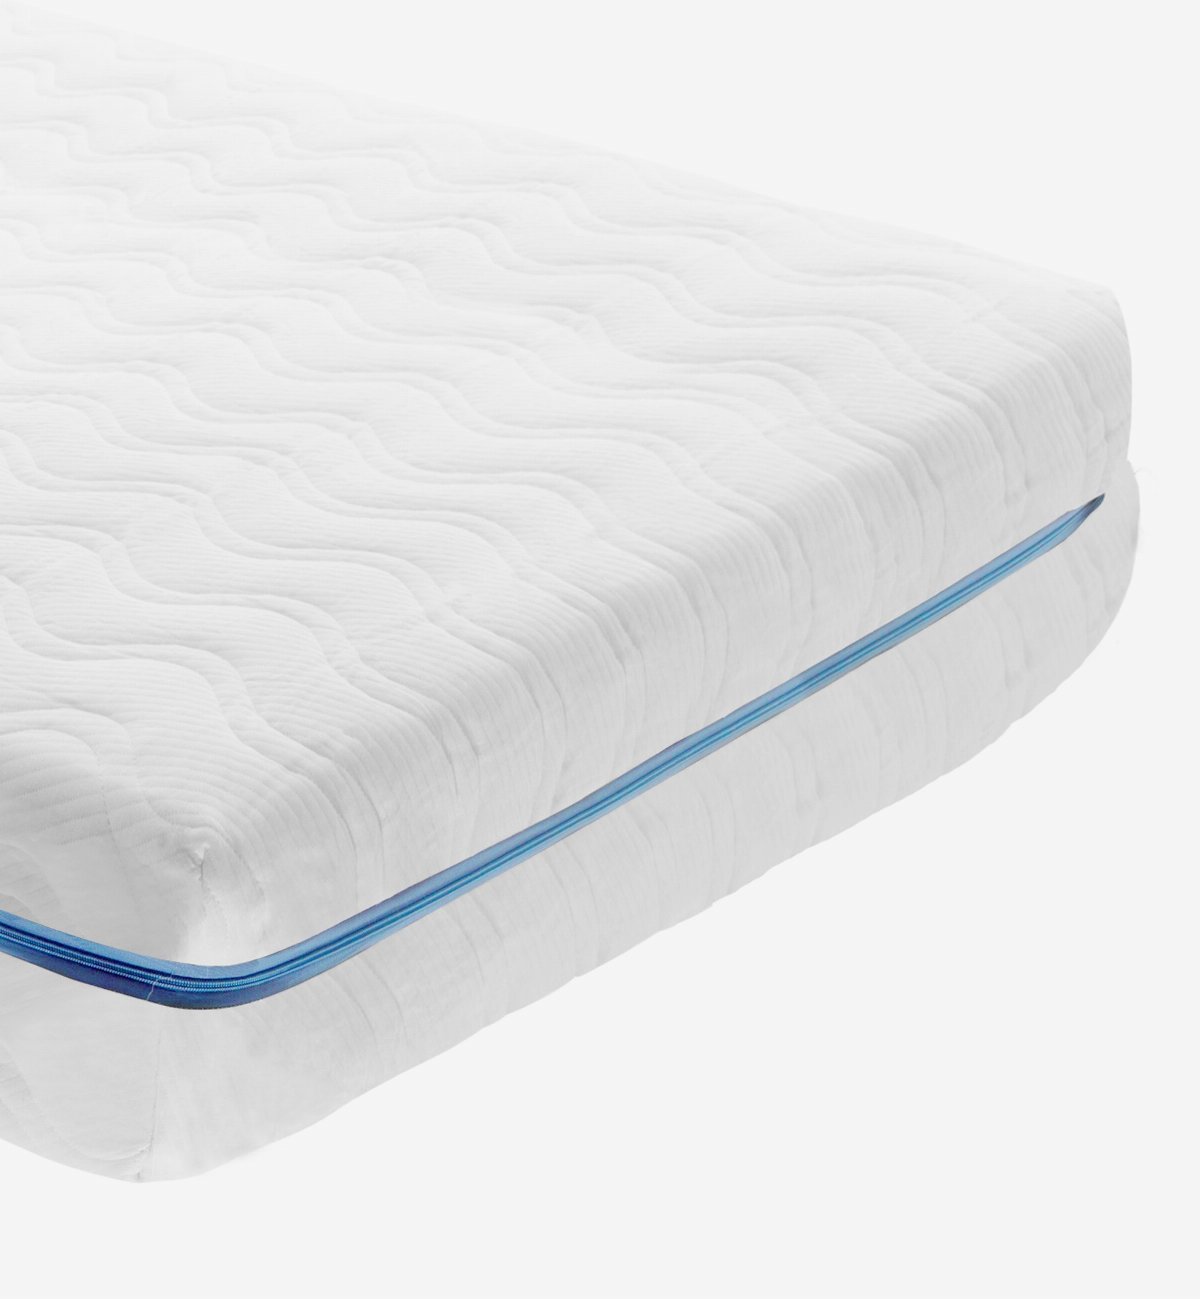 Breathable adult mattress in latex and Kadolis high density foam